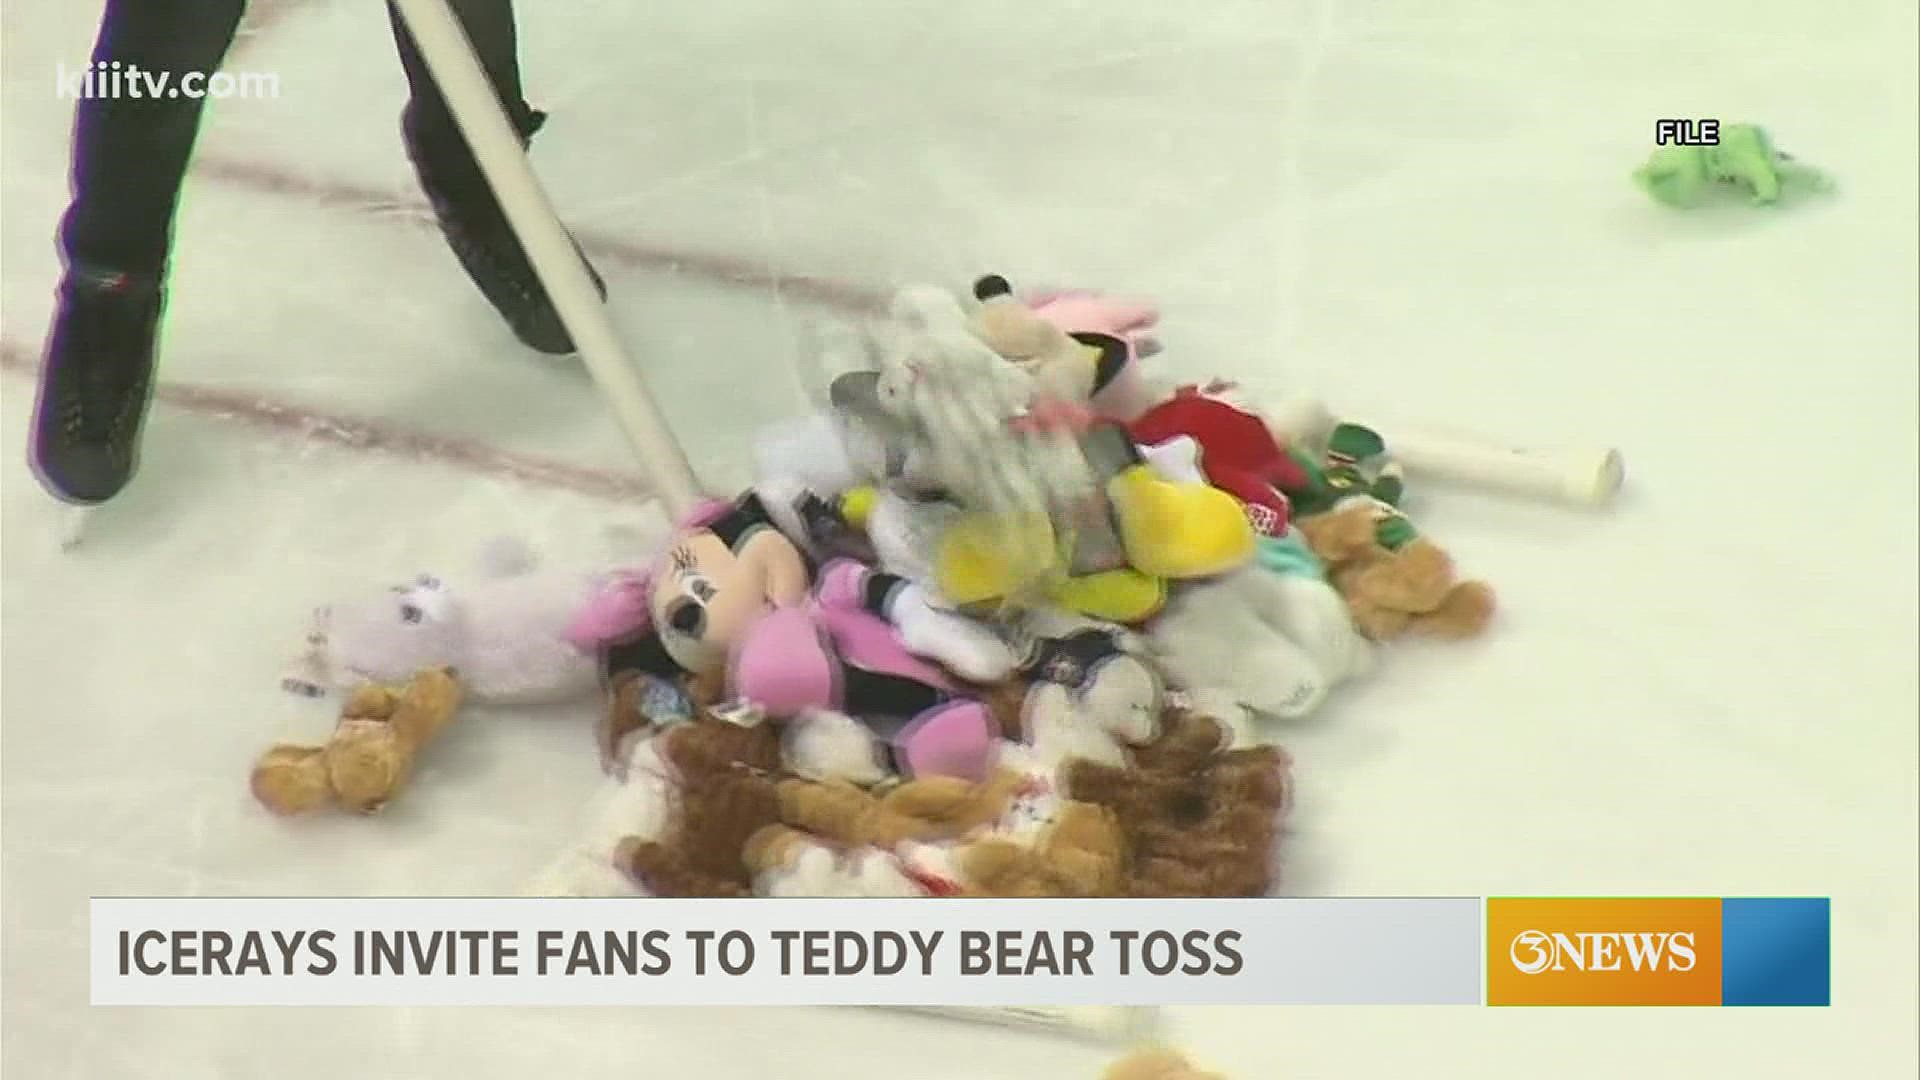 It's the only time fans are encouraged to throw things onto the ice!